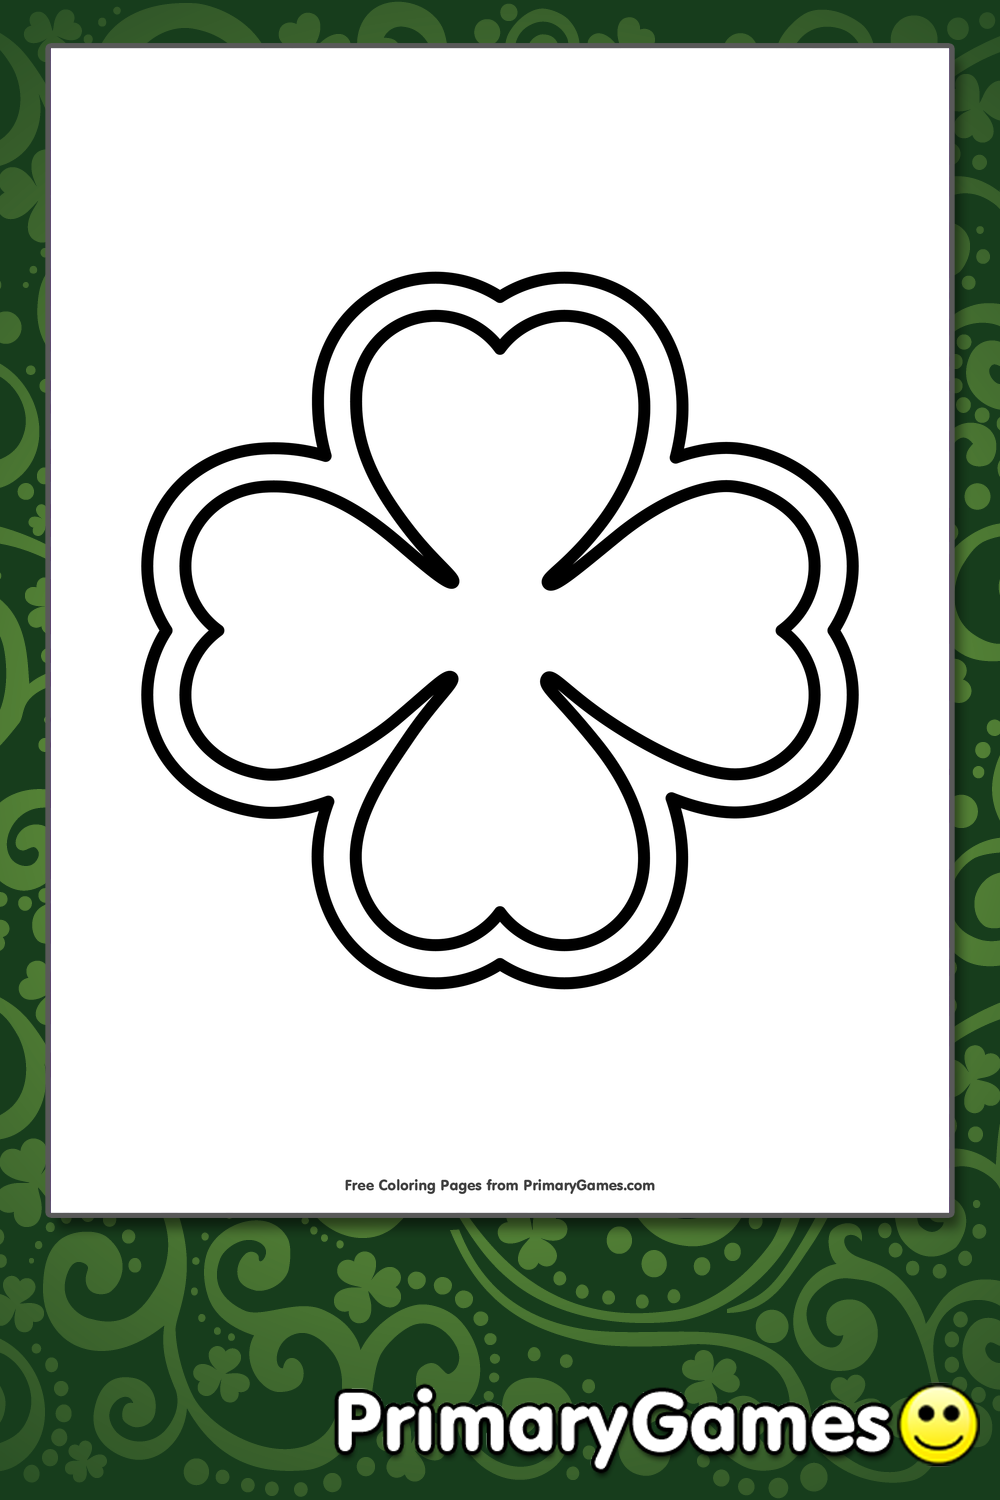 Four leaf clover coloring page â free printable pdf from